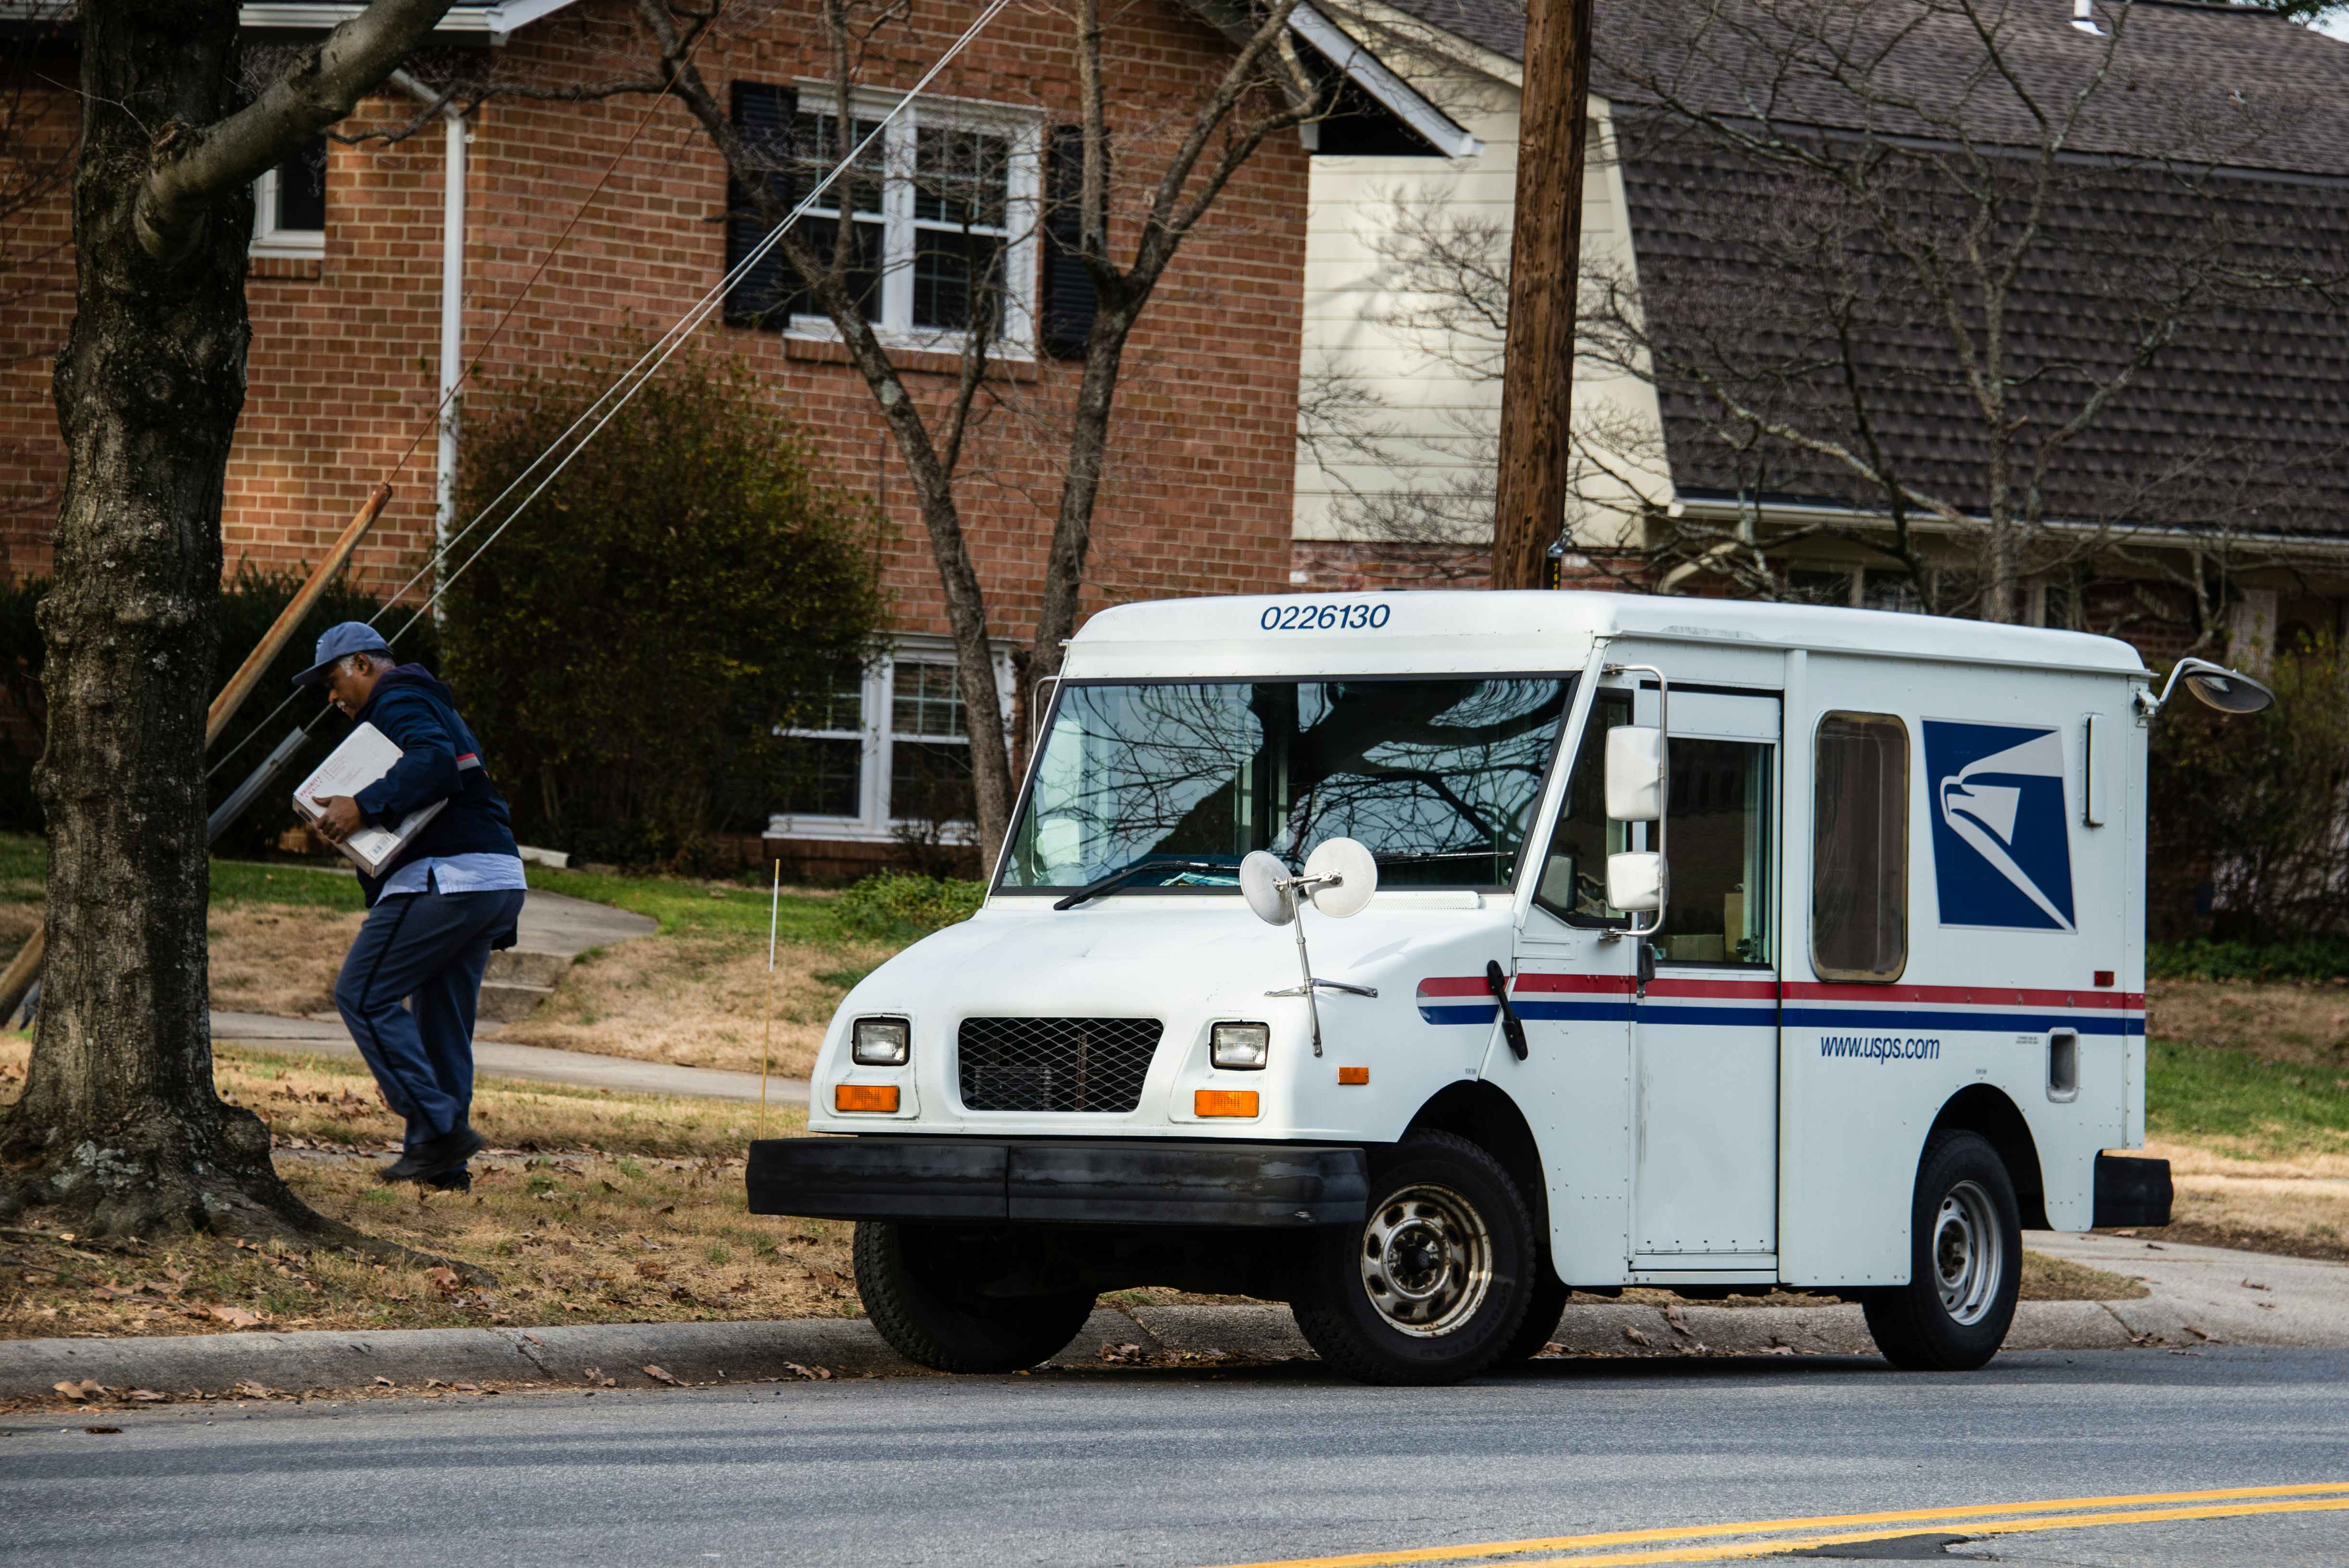 USPS mail truck pulled up to the curb